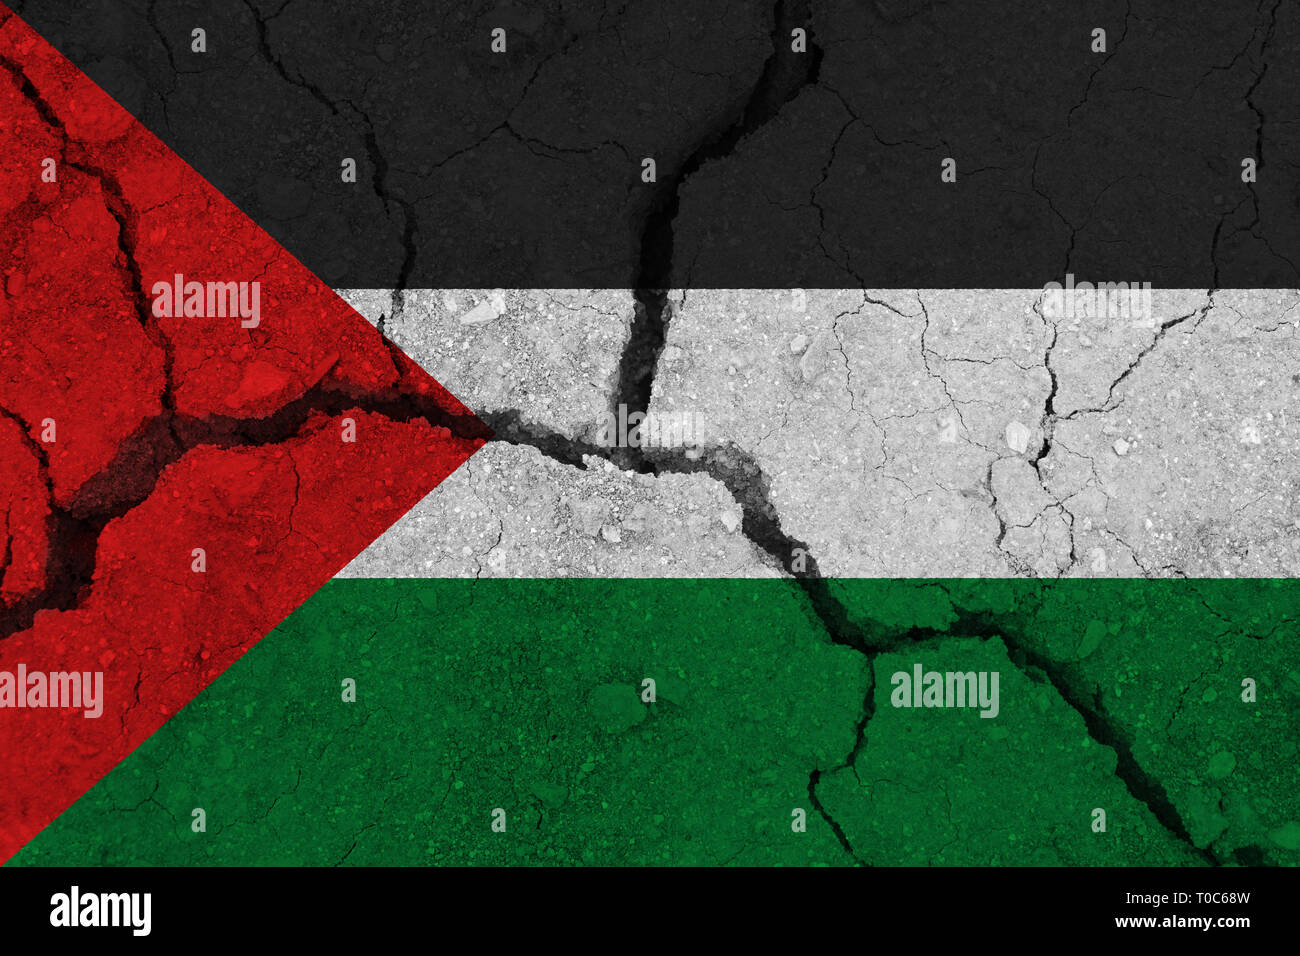 Palestine flag on the cracked earth. National flag of Palestine. Earthquake or drought concept Stock Photo